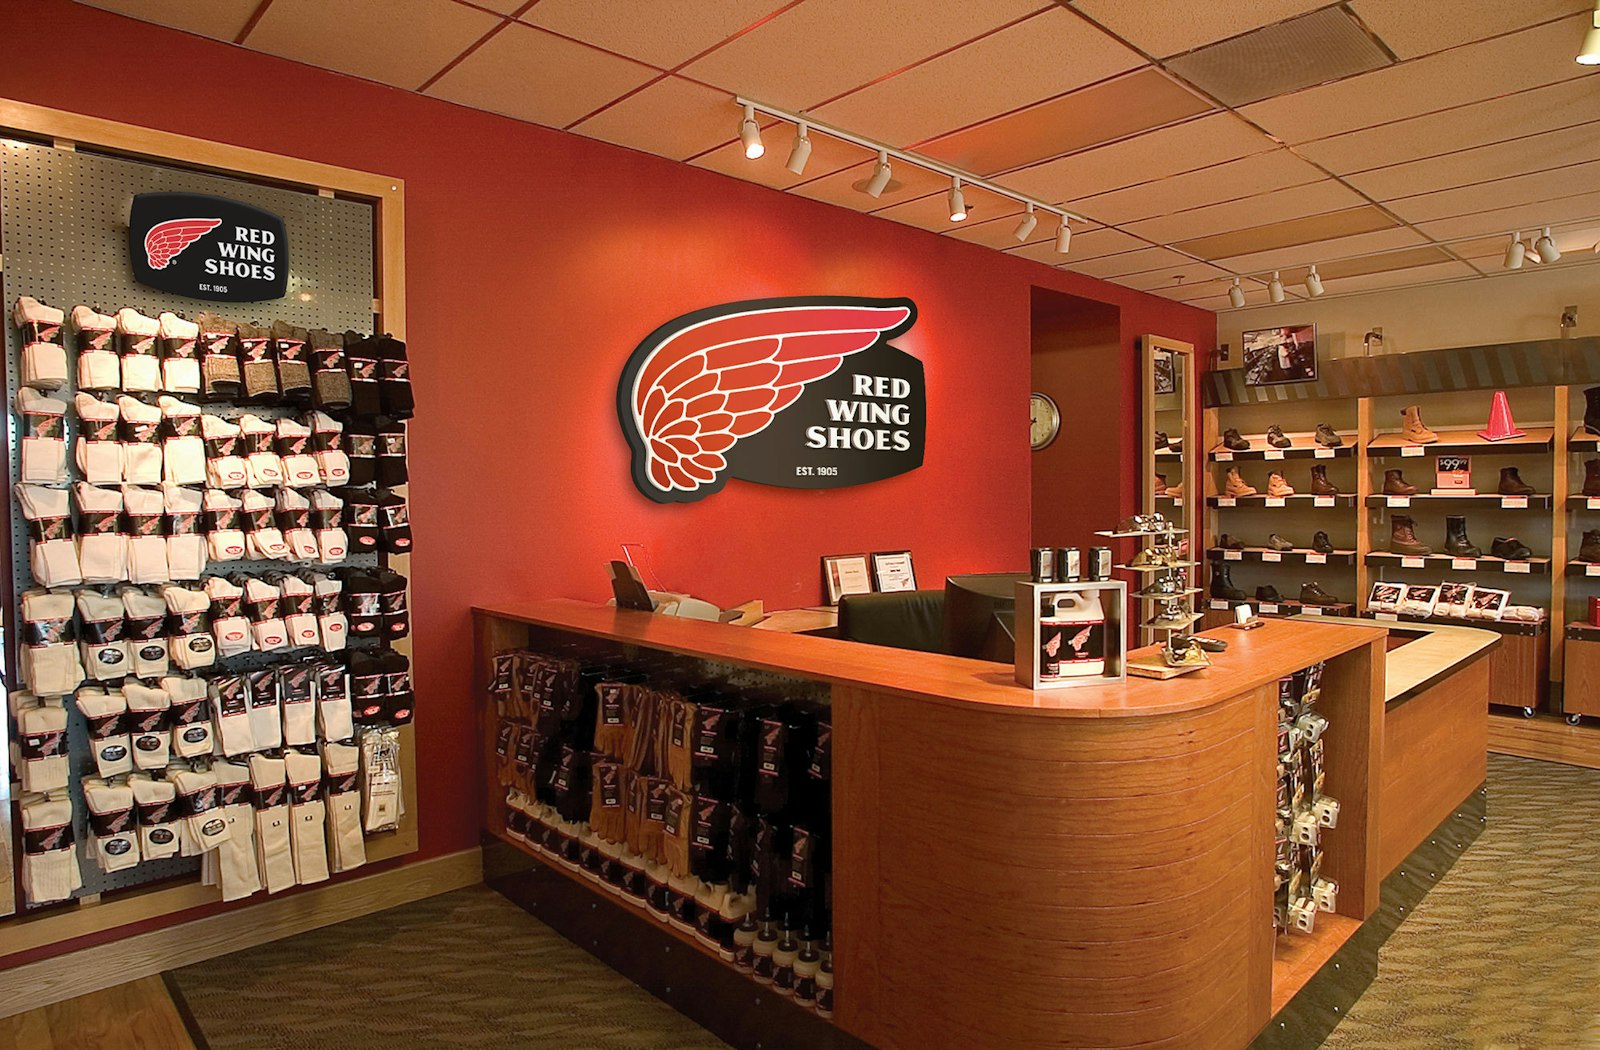 The Red Wing Shoes brand design logo behind retail checkout desk on large sign.